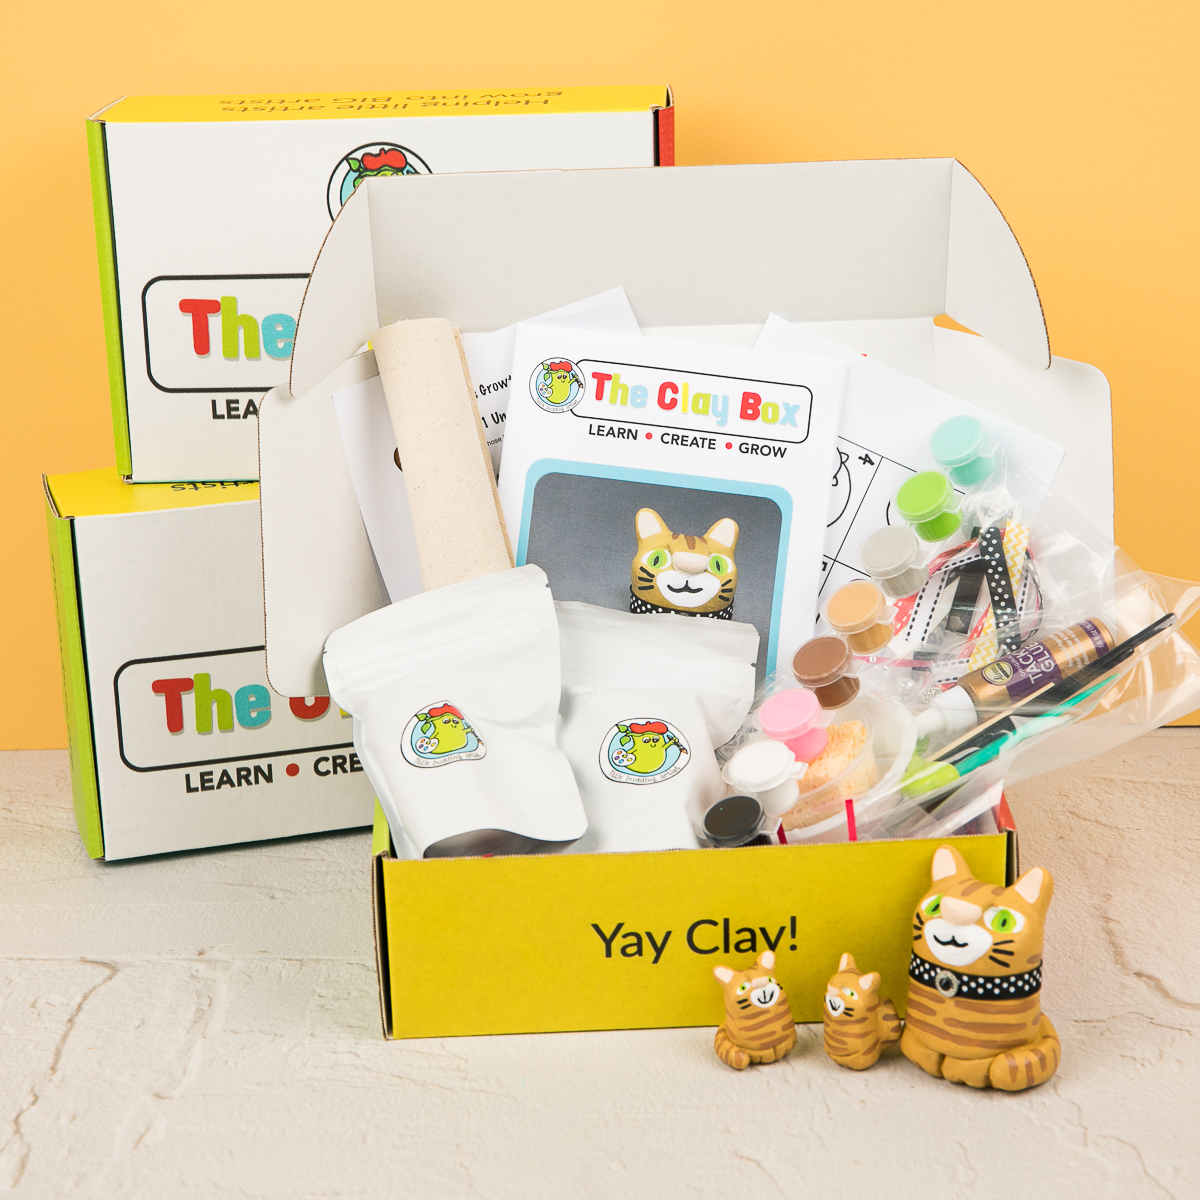 The Clay Box Holiday 2022 Deal: Get a FREE Holiday Clay Kit